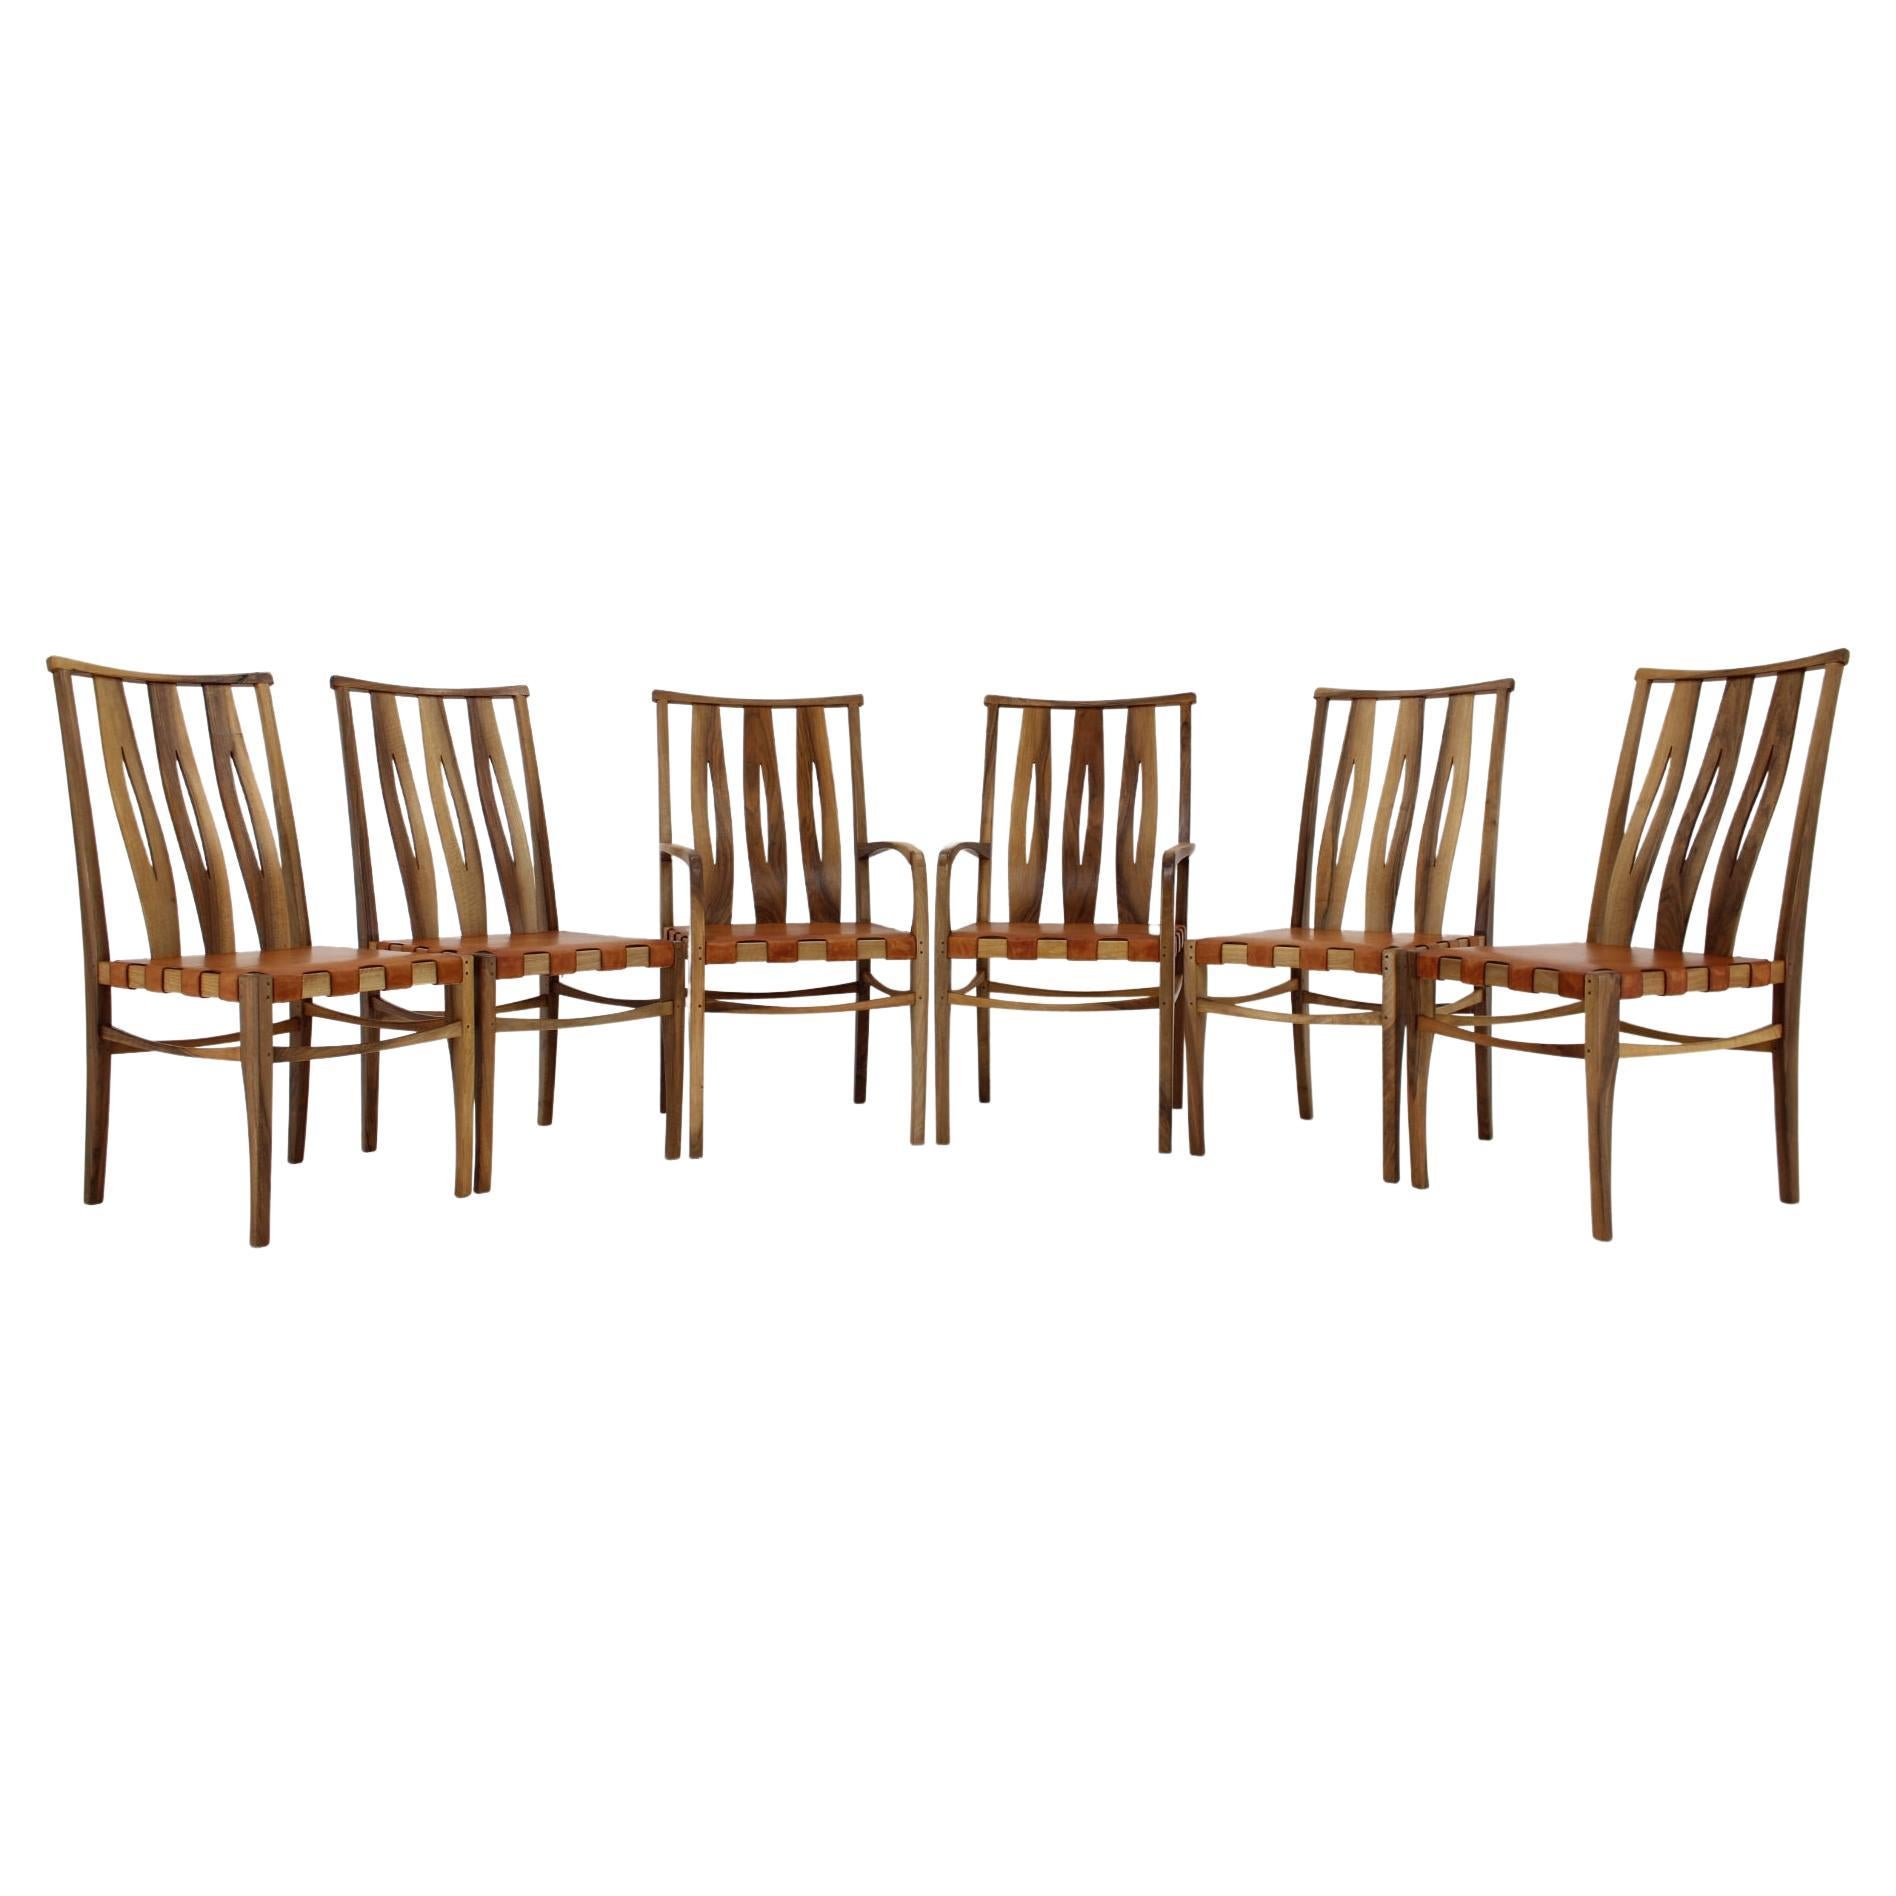 2001 One of a Kind Custom Made Set of Walnut and Leather Dining Chairs, Set of 6 For Sale